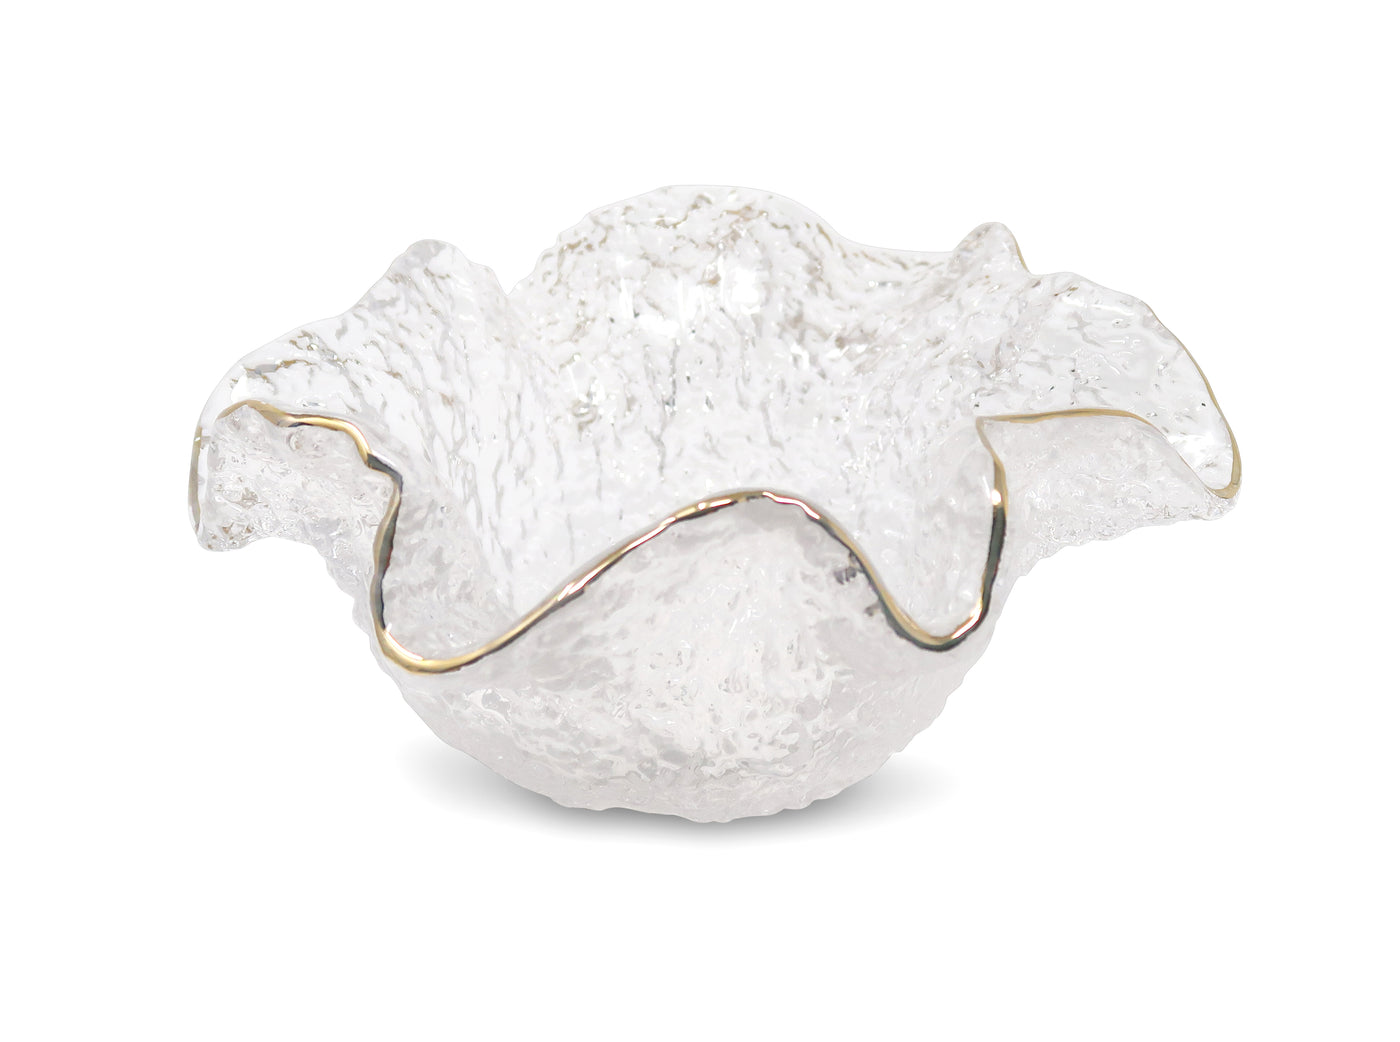 Hammered Glass Ruffled Bowl with Gold Trim (3 sizes)